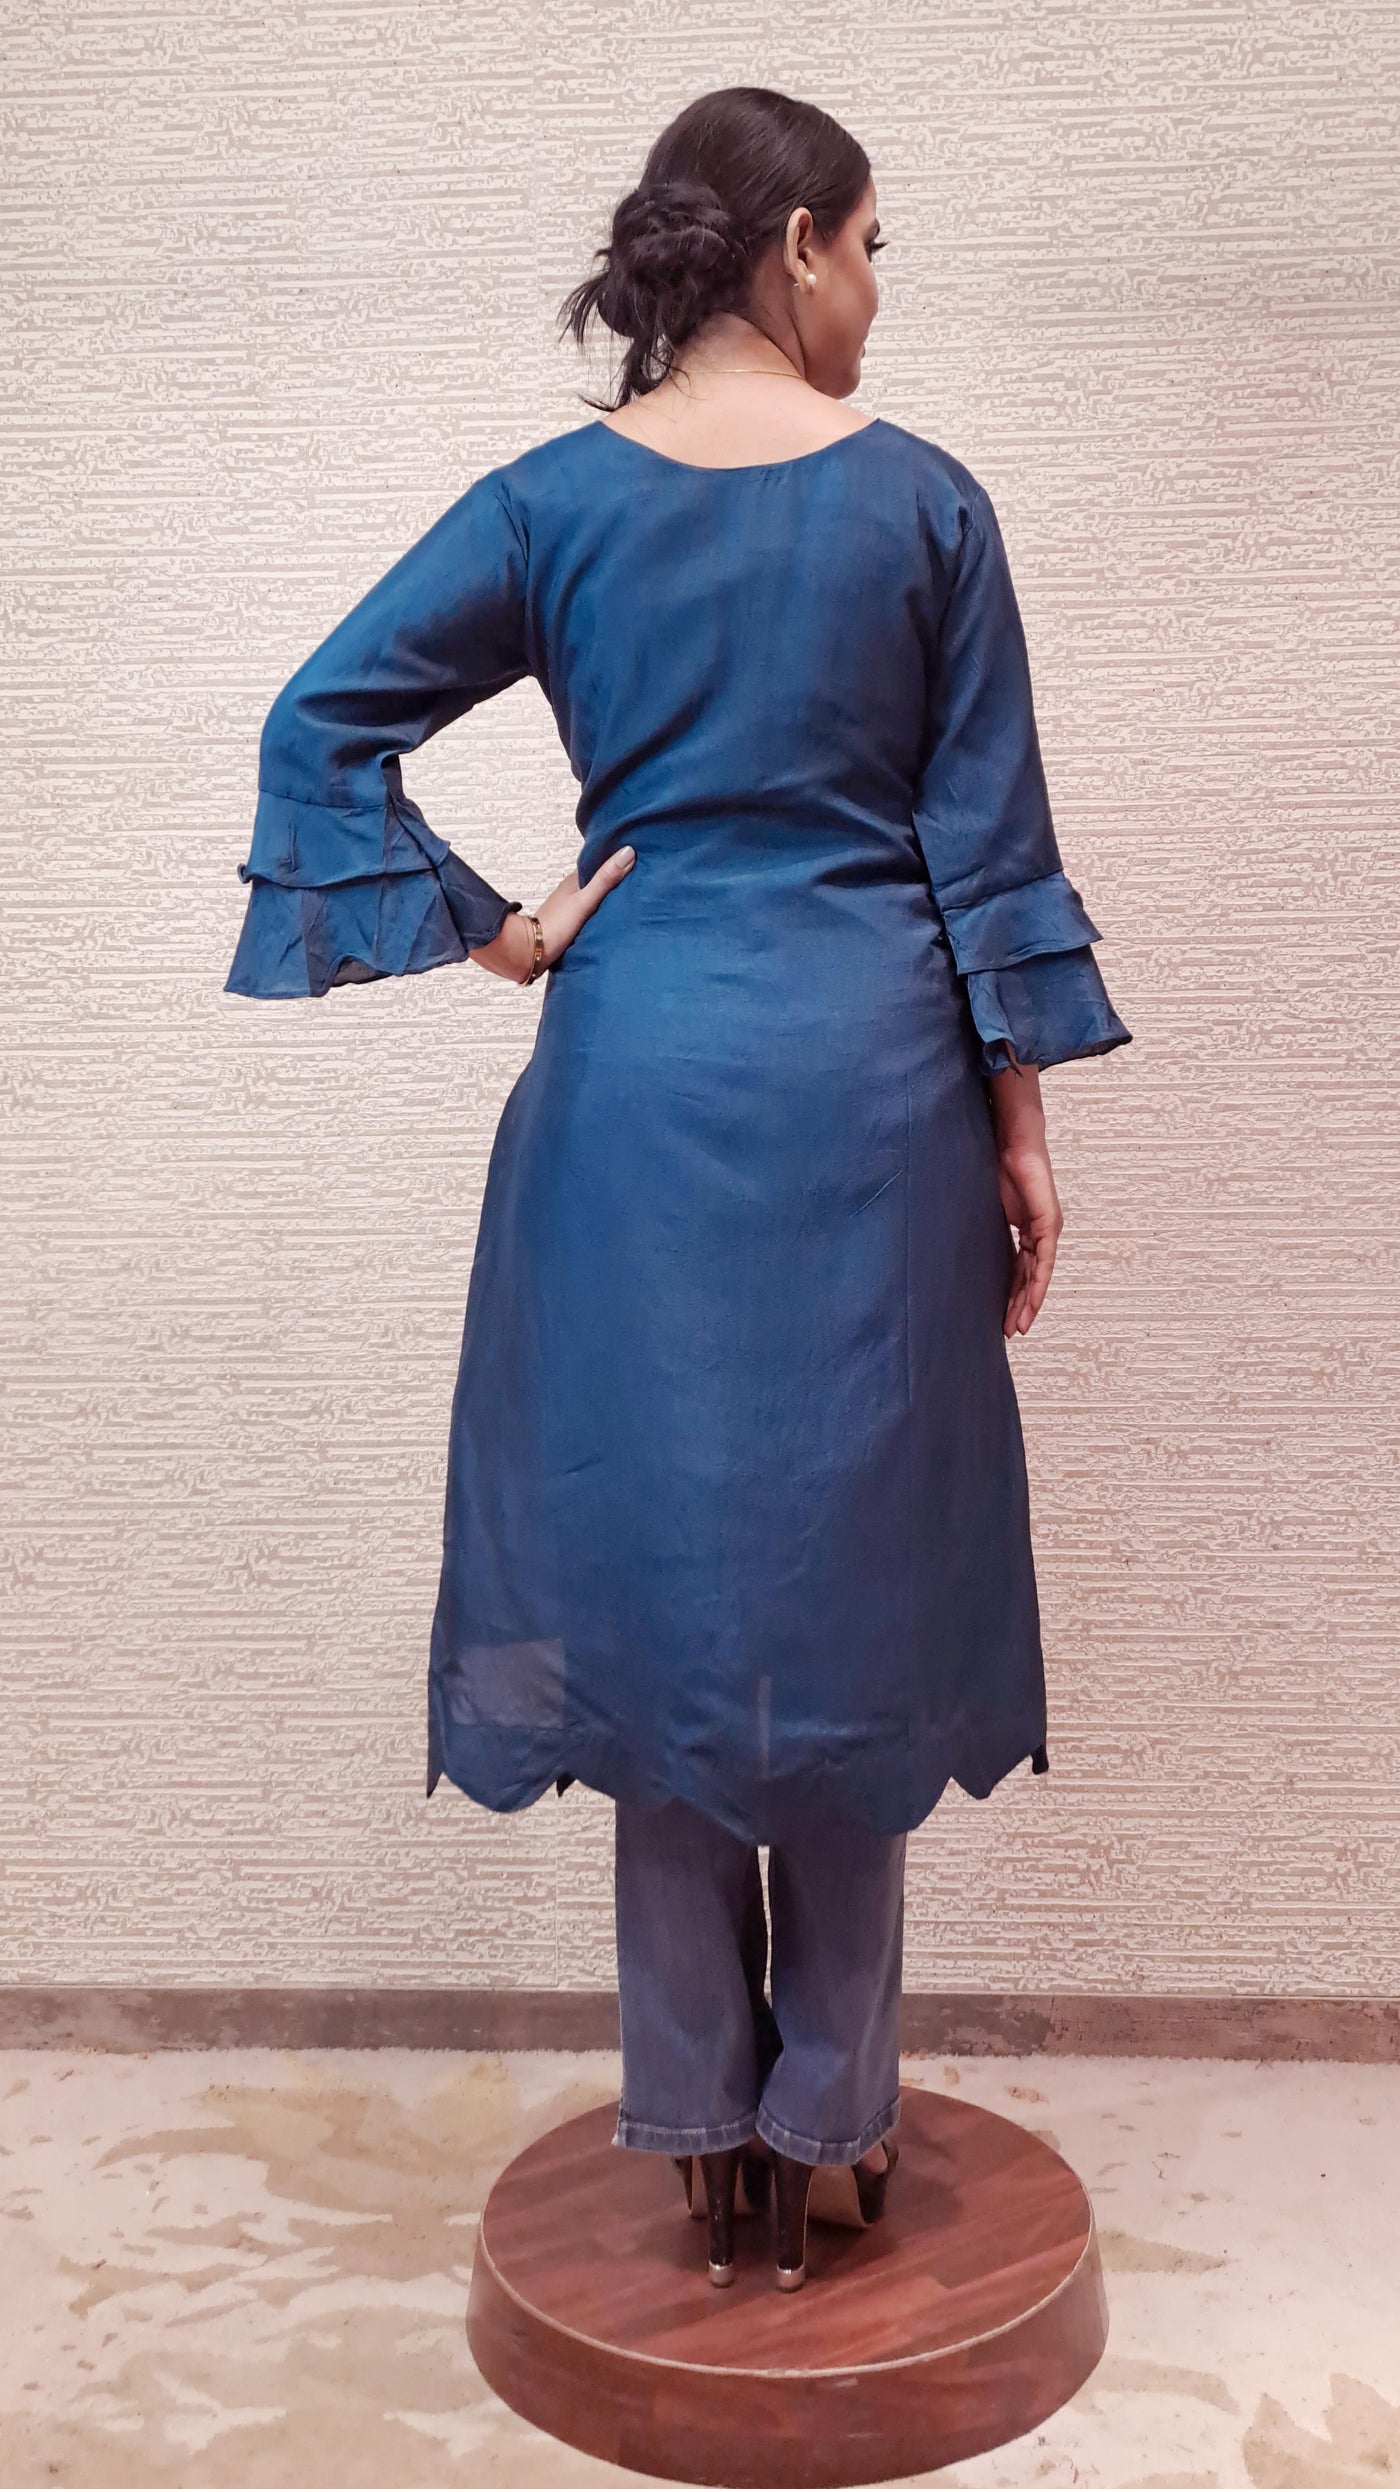 Stunning Deep Teal Blue Bell Sleeves Kurti With 3D Floral Embroidery